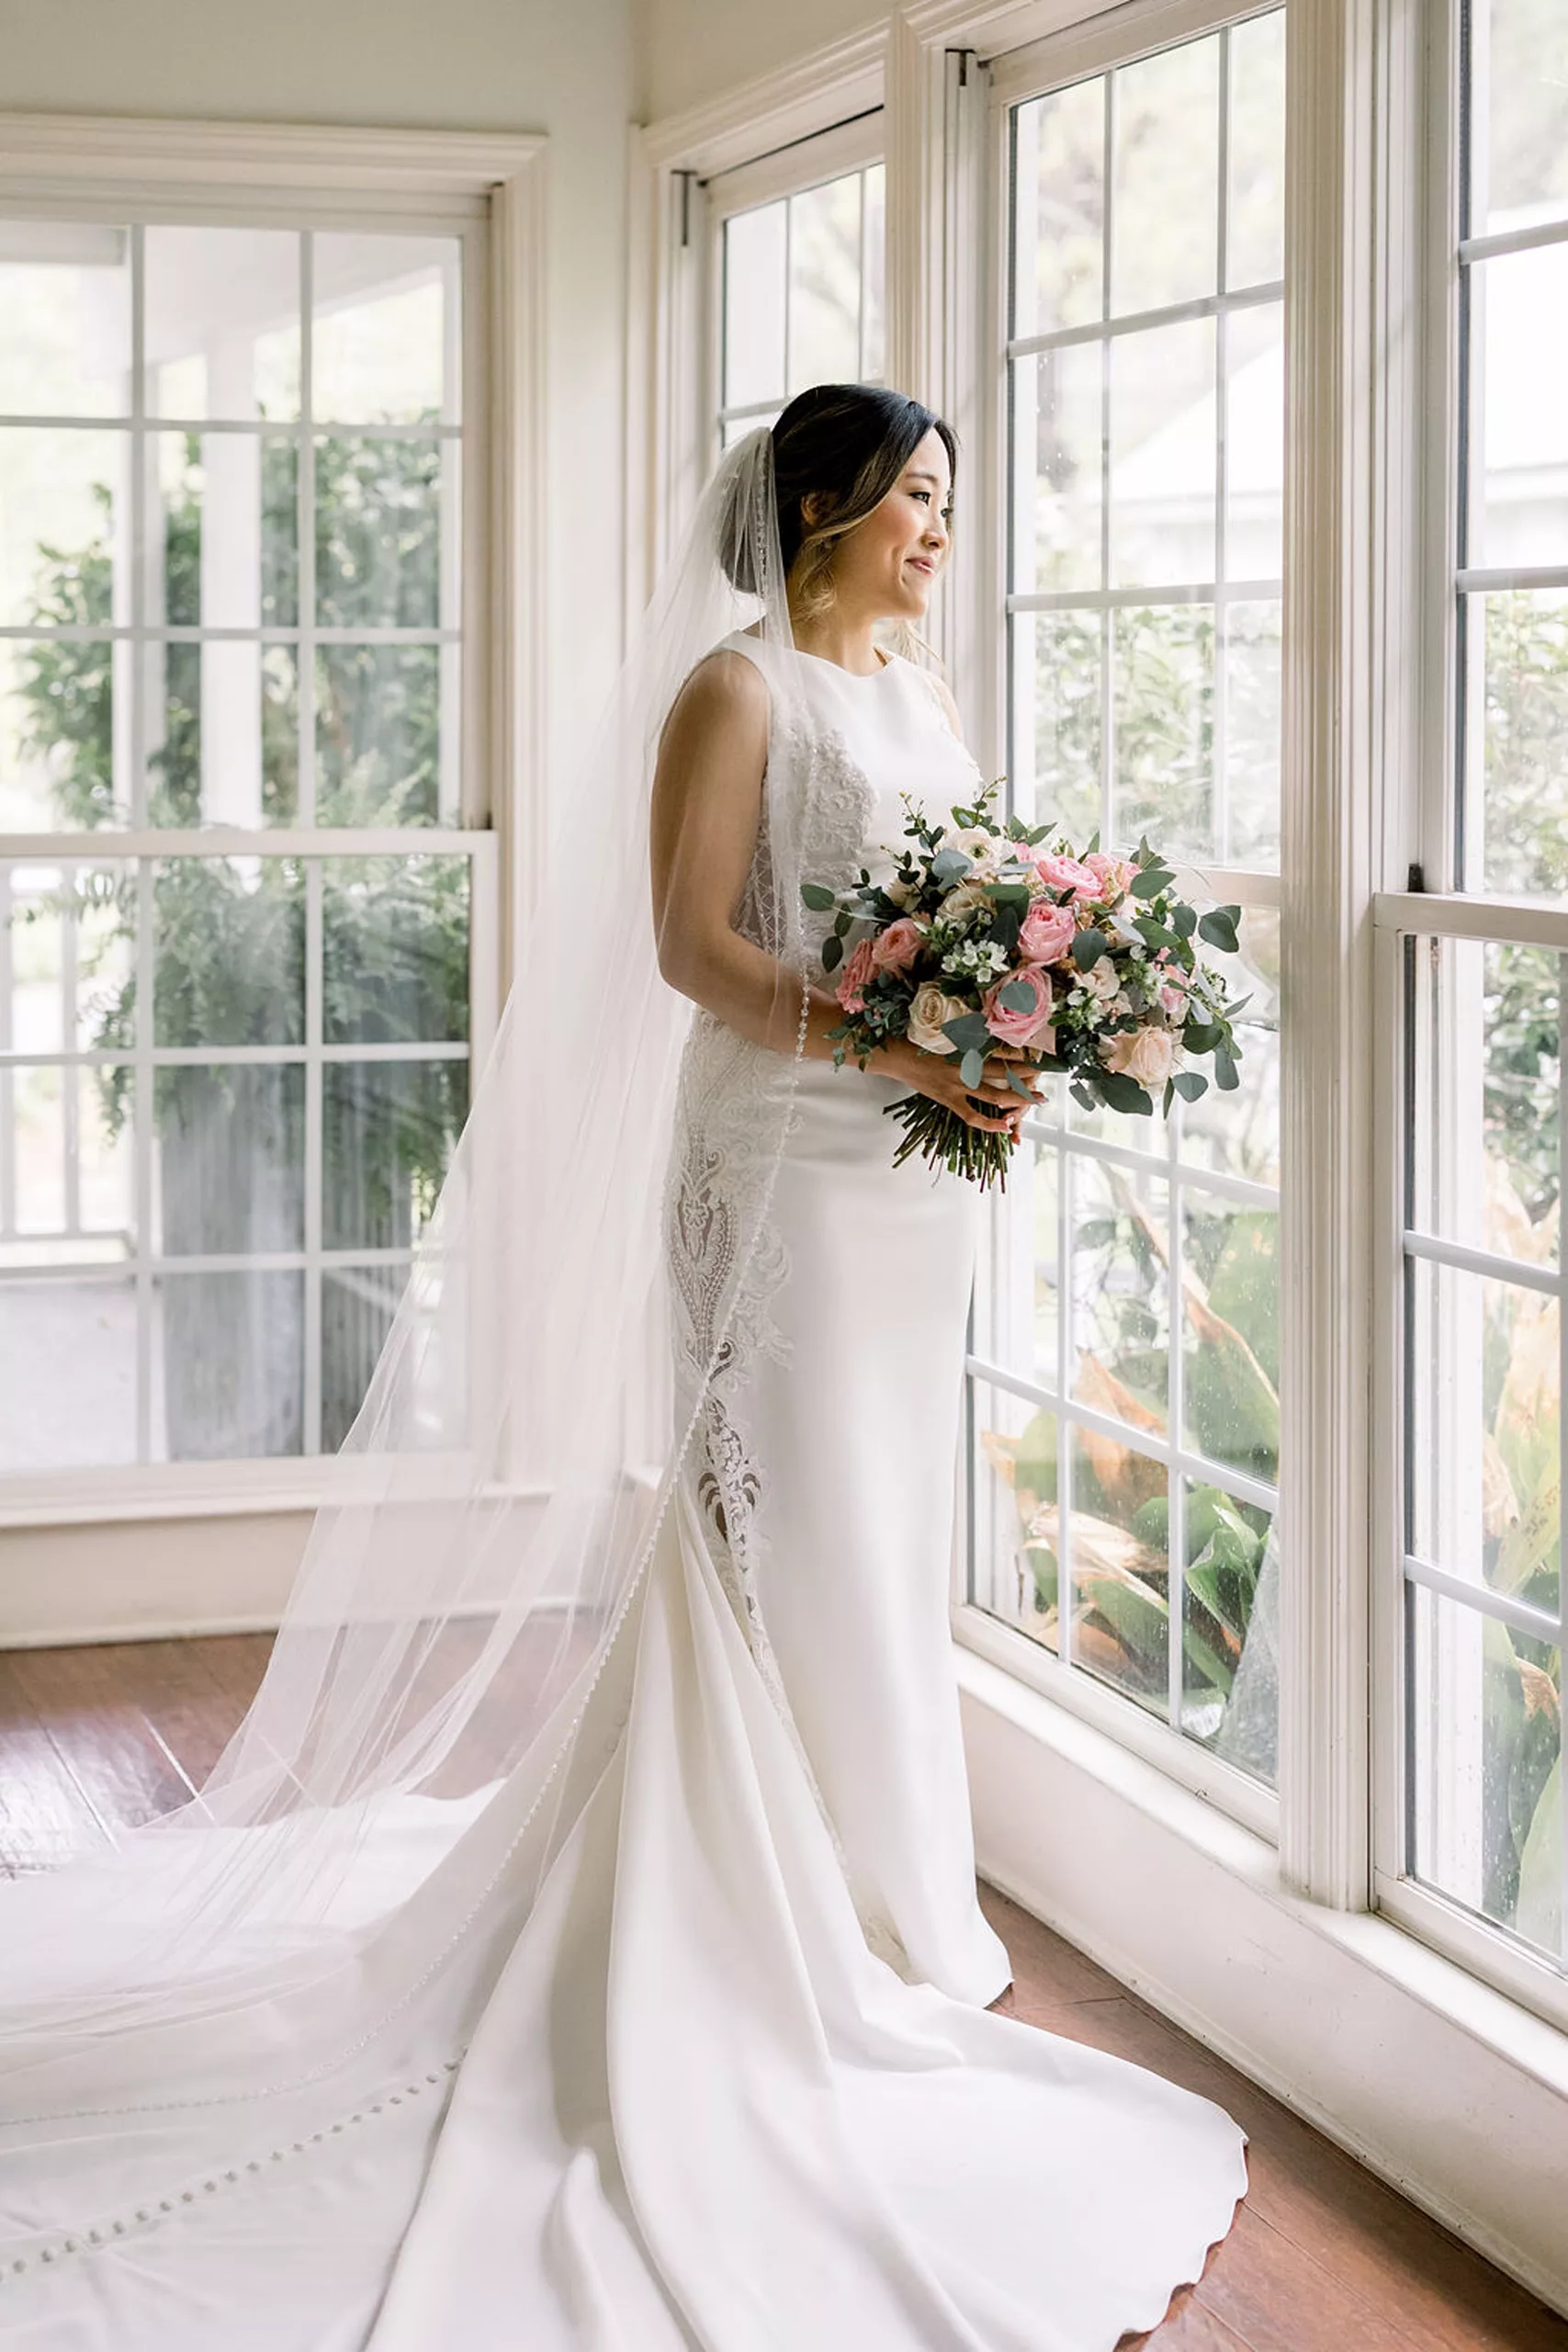 A bride stands in a sun room smiling out the window while holding her pink and white bouquet